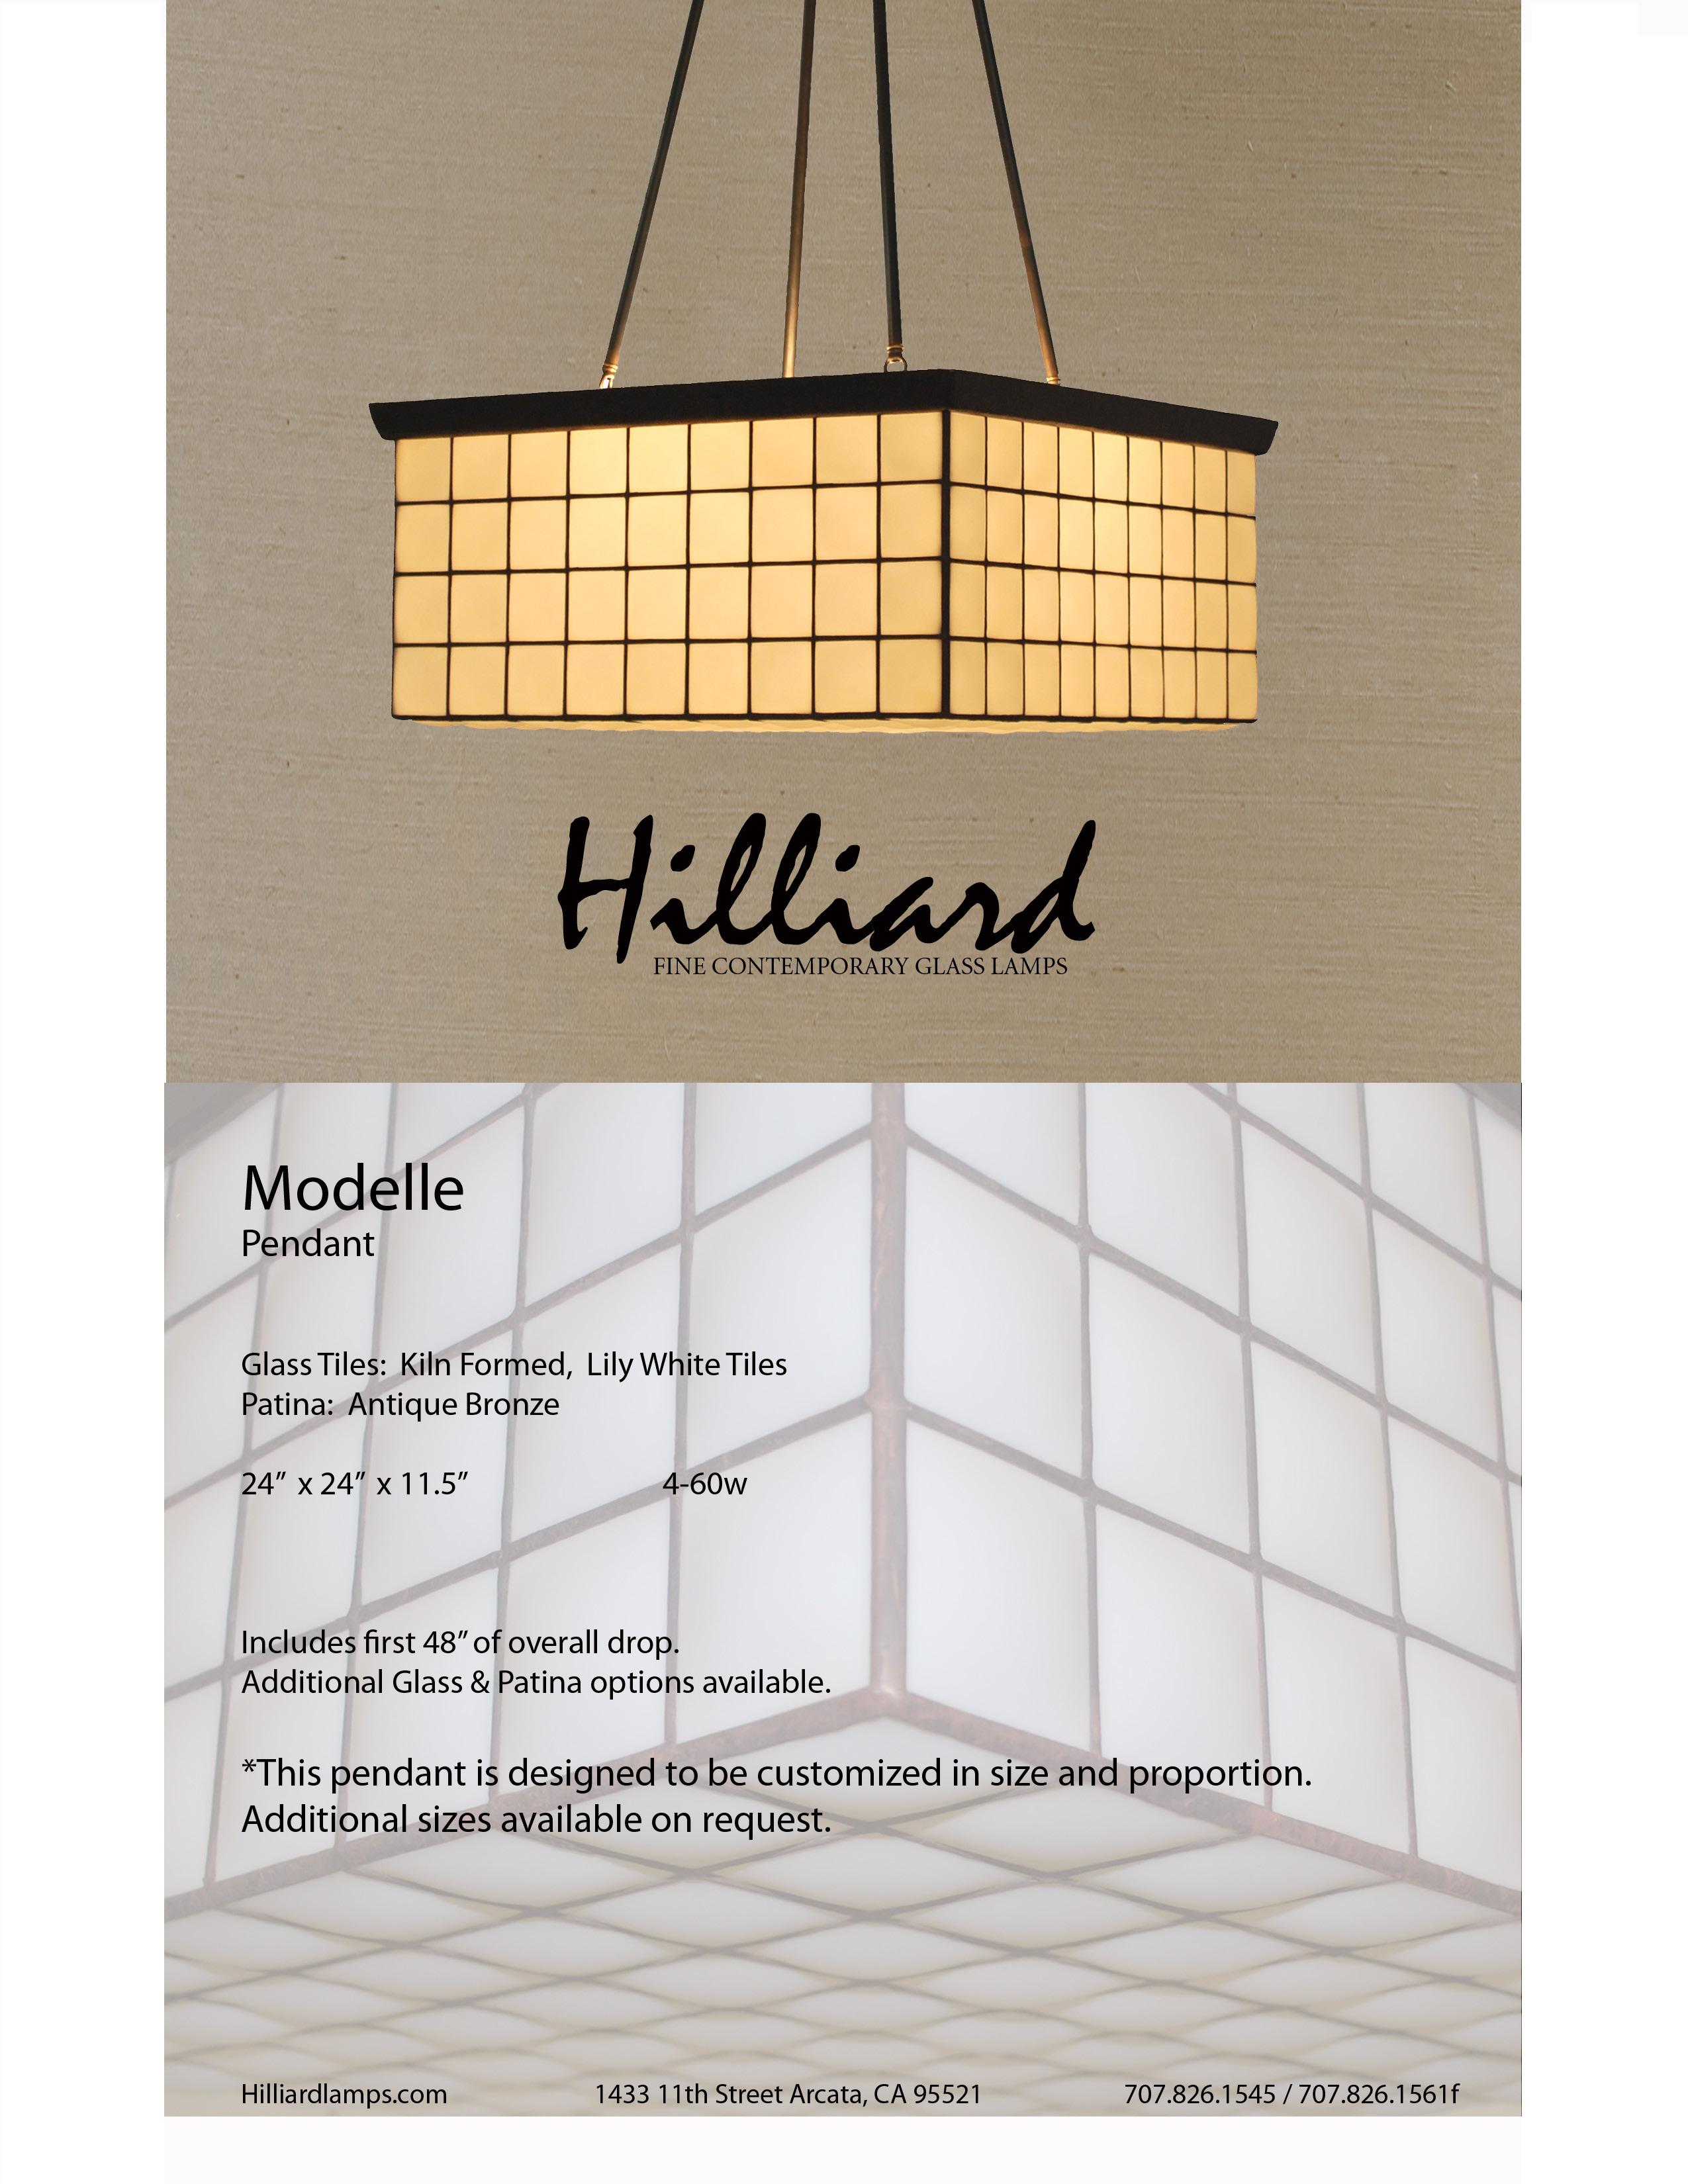 Modelle Pendant
Glass: Kiln Formed, Ivory Tiles
Patina: Antique Bronze
24” x 24” x 11.5”	4-60w
Includes first 48″ of overall drop.
UL Listed 120v  220v available
Title 24 JA8 Compliant upon request